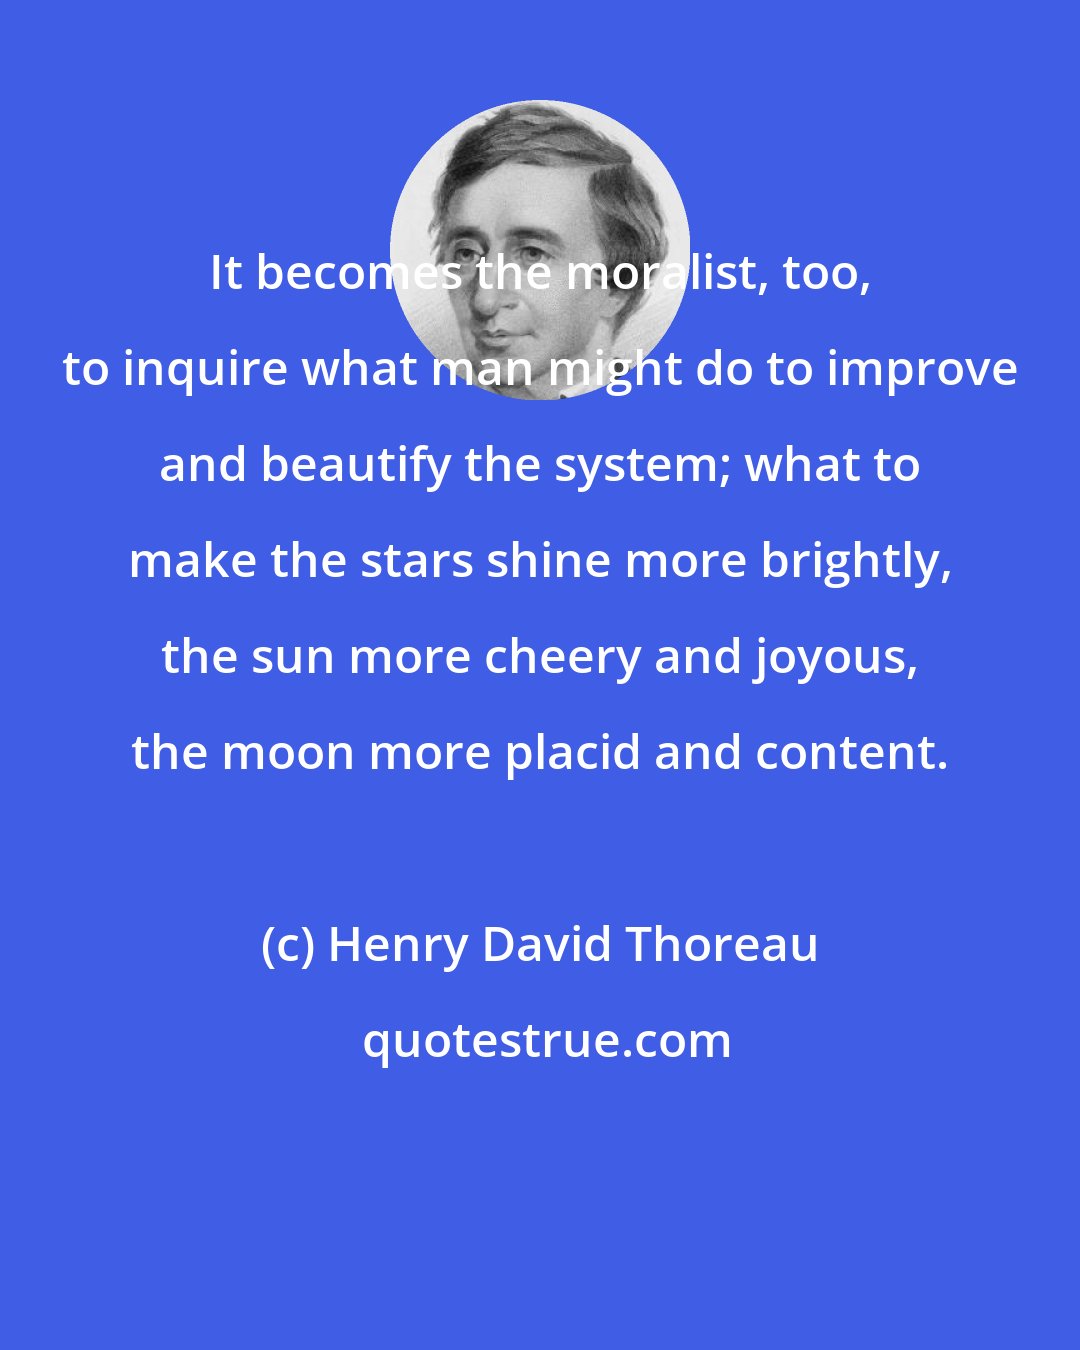 Henry David Thoreau: It becomes the moralist, too, to inquire what man might do to improve and beautify the system; what to make the stars shine more brightly, the sun more cheery and joyous, the moon more placid and content.